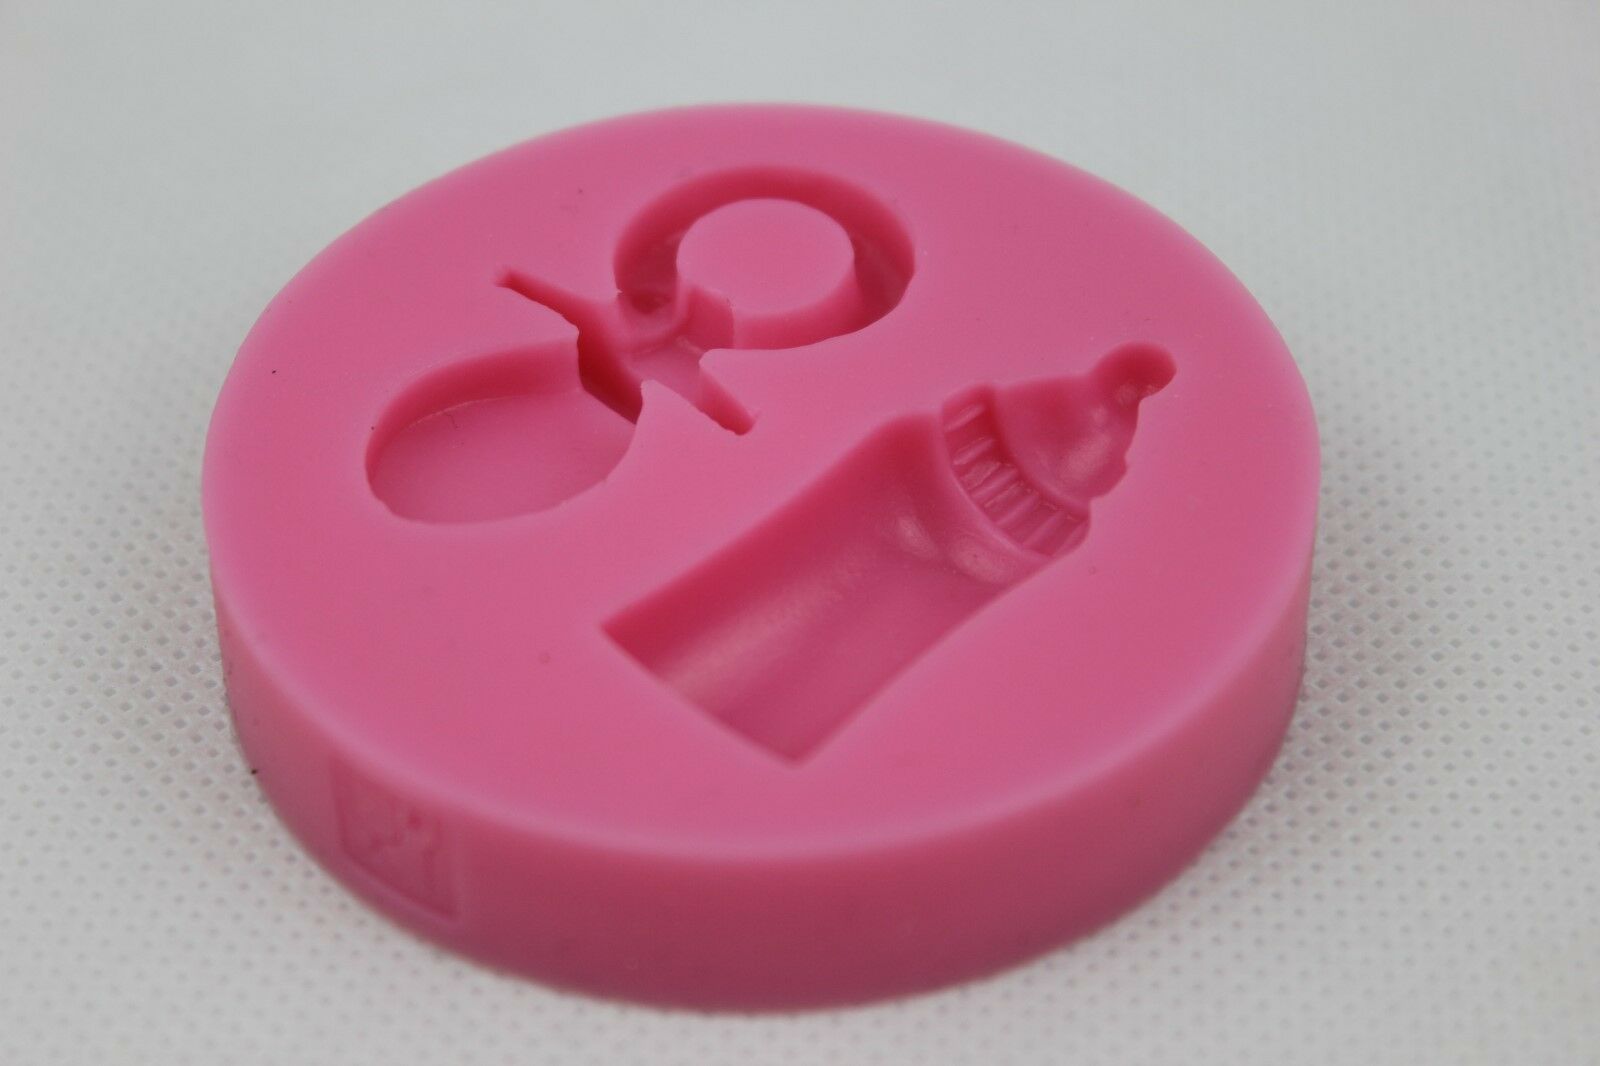 attachment-https://www.cupcakeaddicts.co.uk/wp-content/uploads/imported/9/Baby-Bottle-Dummy-Soother-Silicone-Mould-Baby-Shower-Christening-Cake-Icing-323145306799-4.jpg